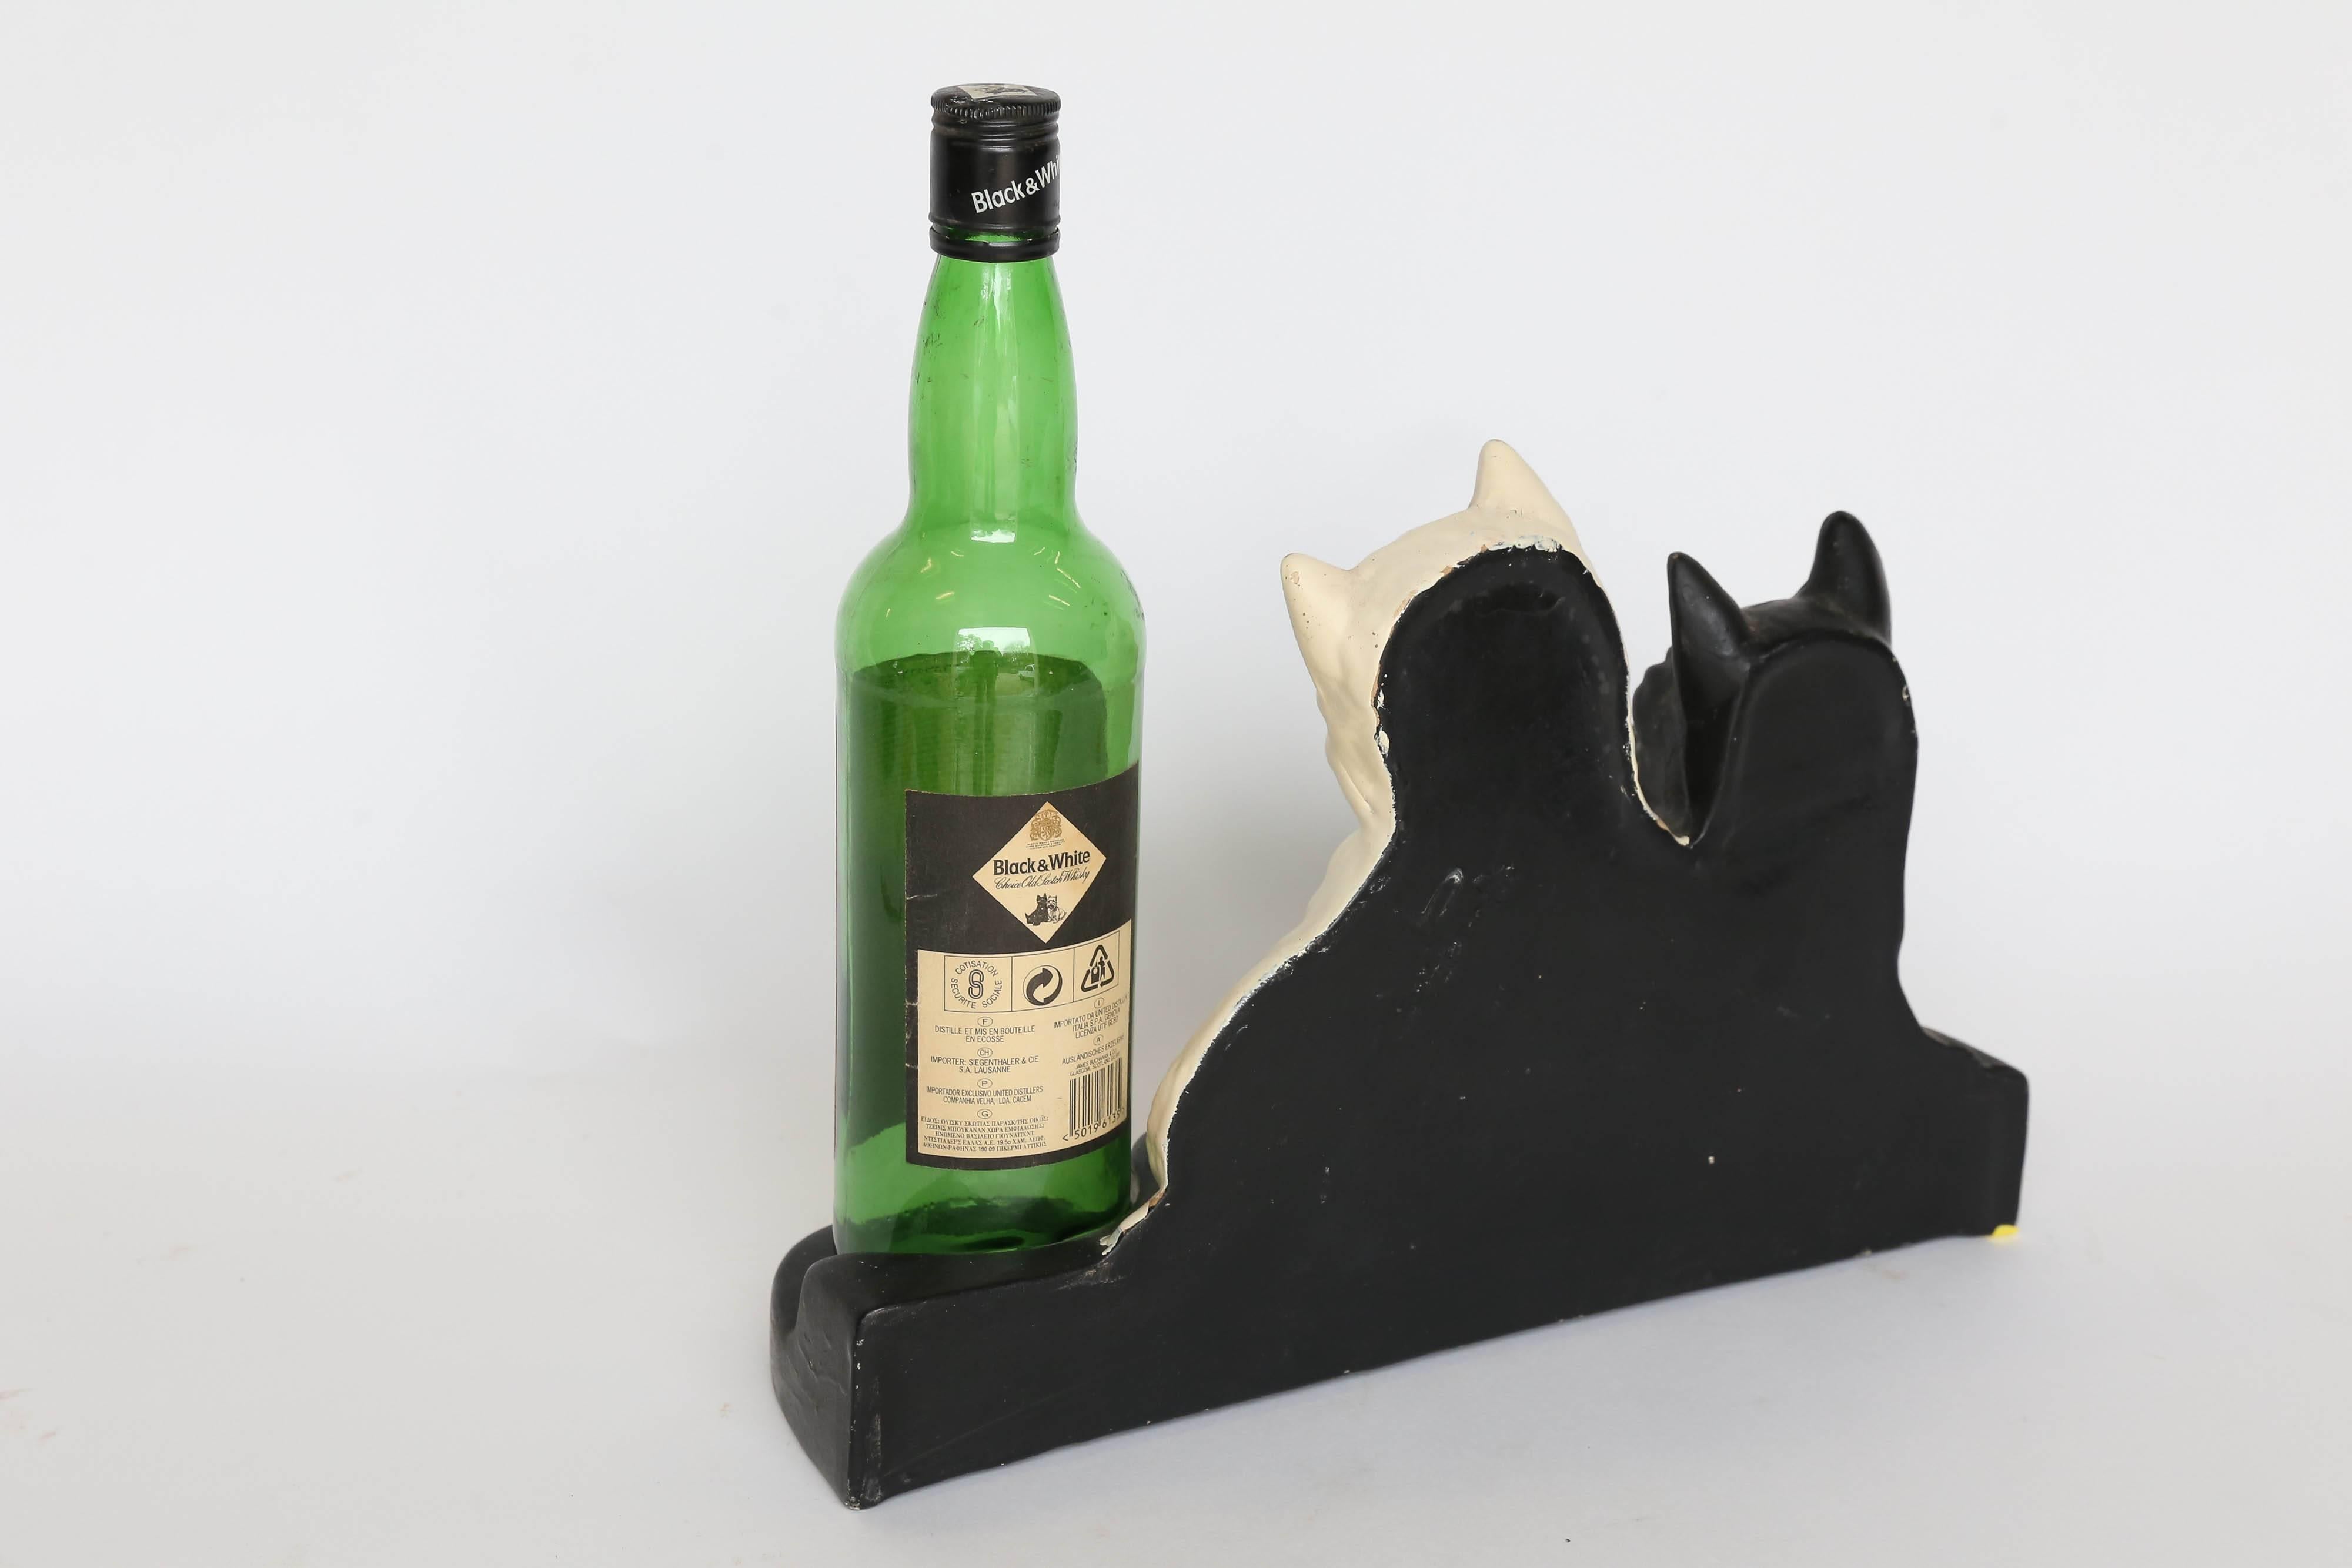 whisky stand